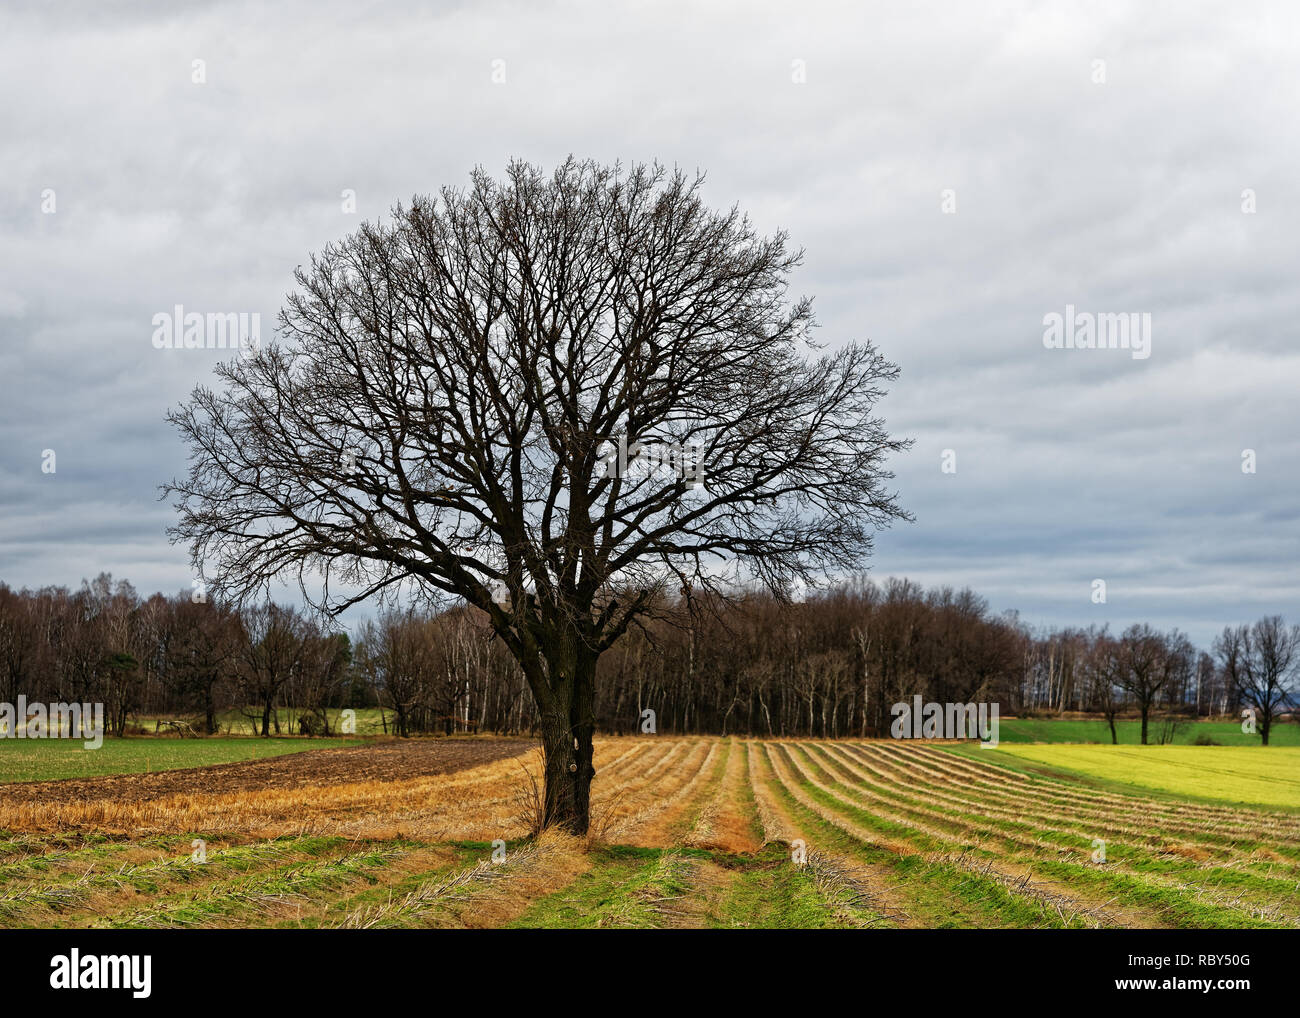 Tree without leaves with round crown on a harvested field, bumps as a view guide, in the background a forest area - Location: Saxony, Germany Stock Photo